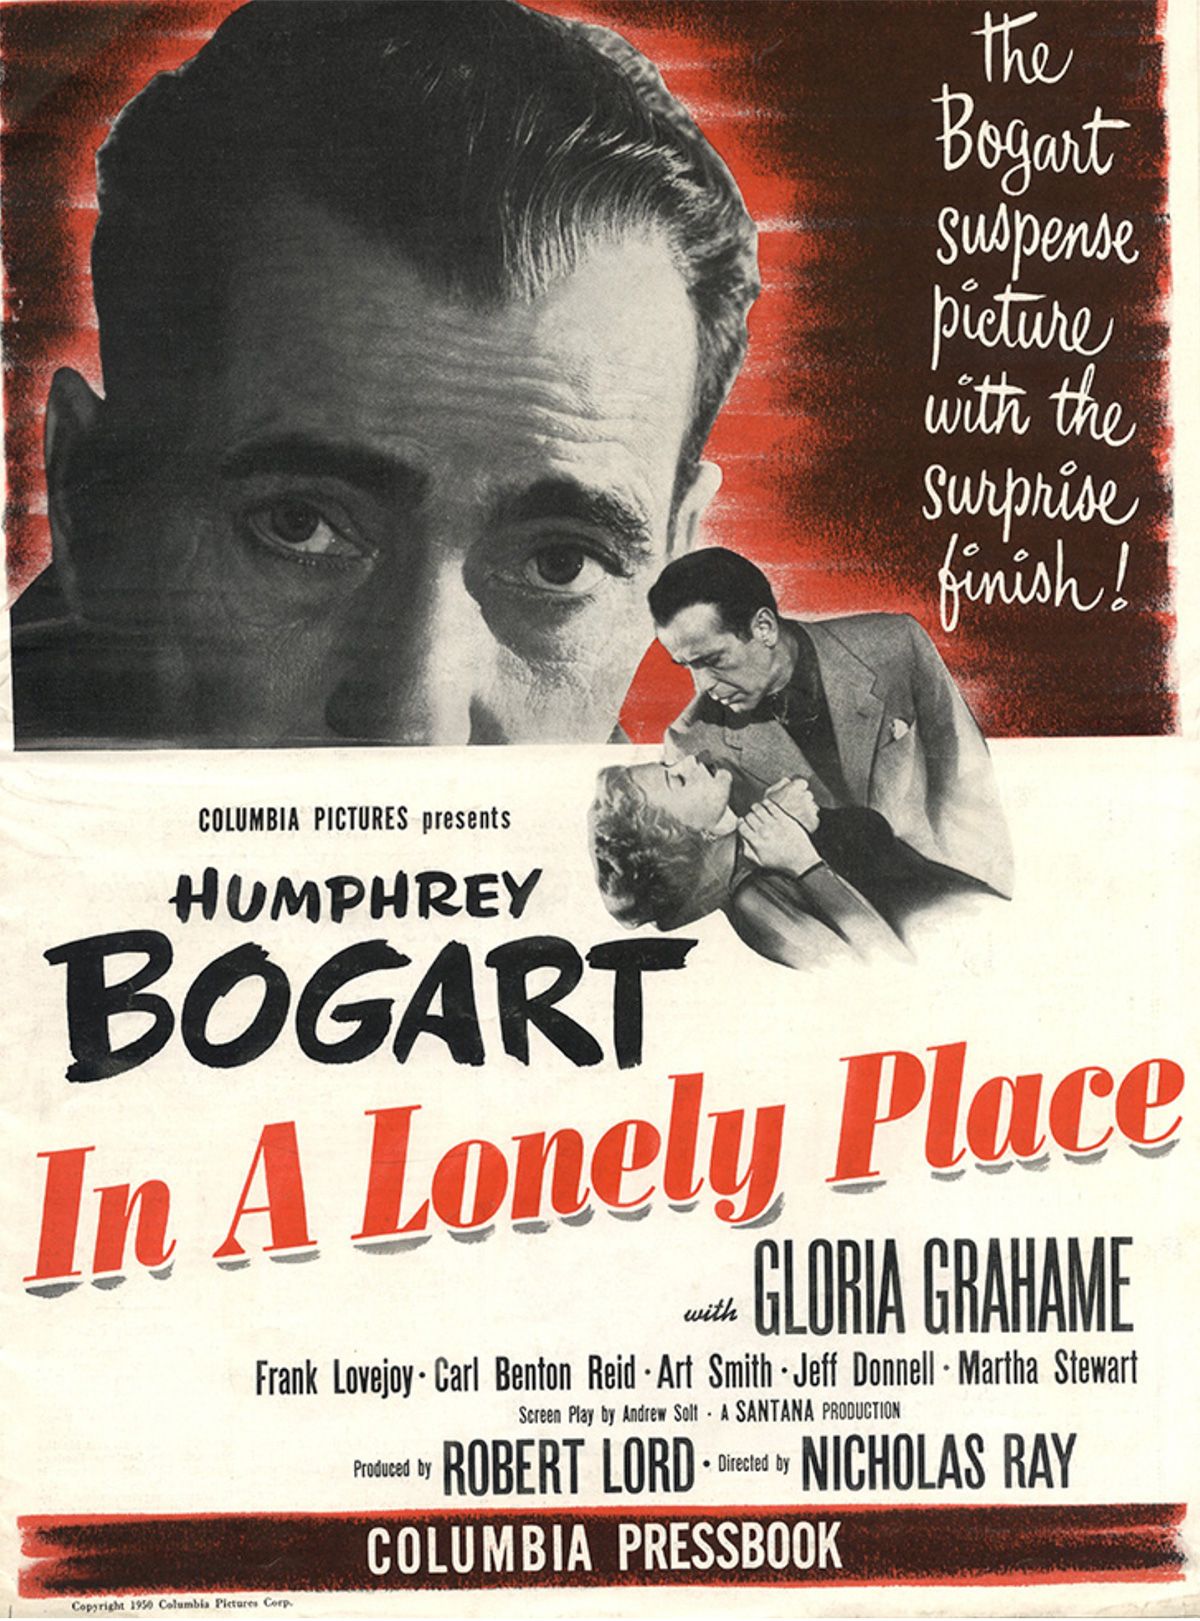 In A Lonely Place - Cover of Campaign Book